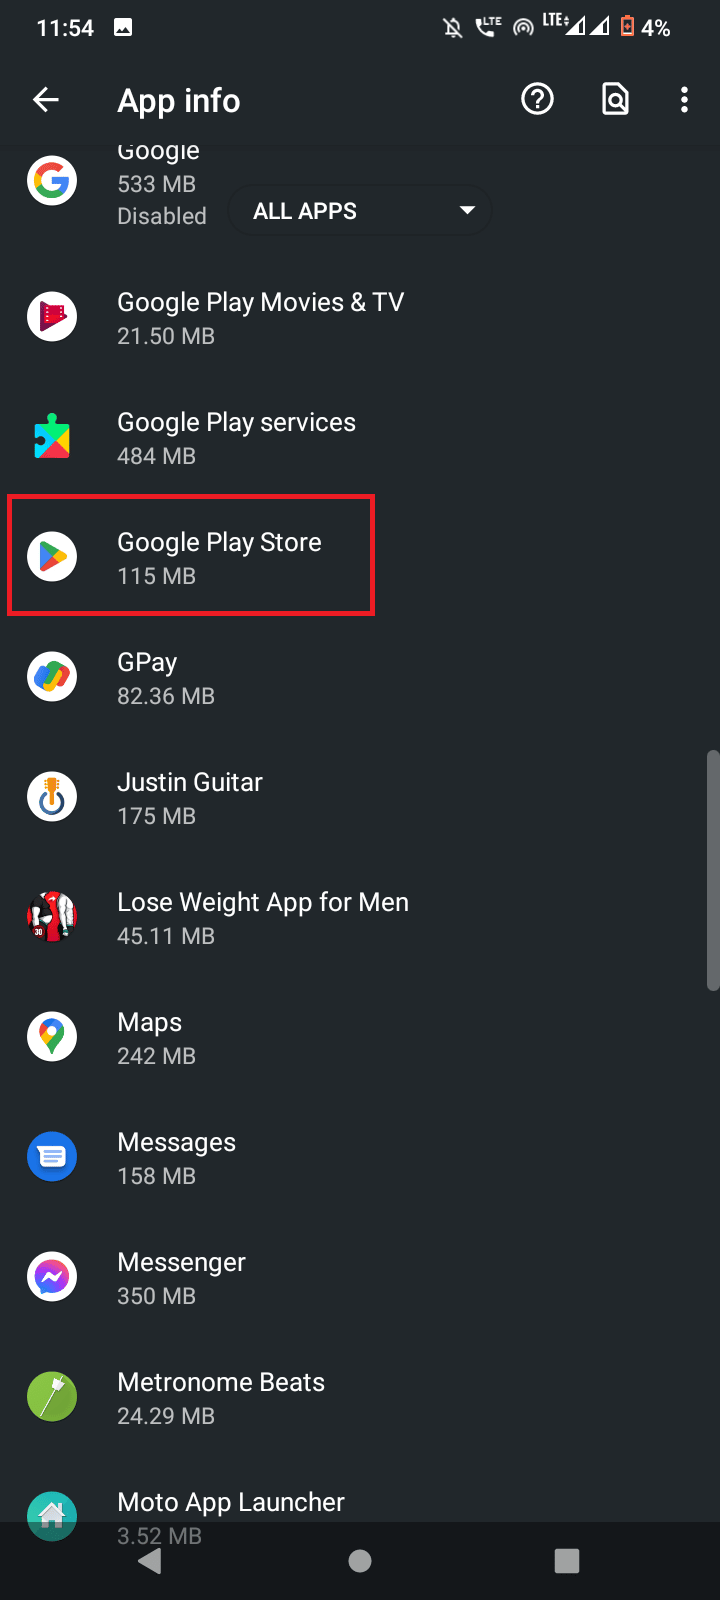 Search for the Google Playstore and tap on it